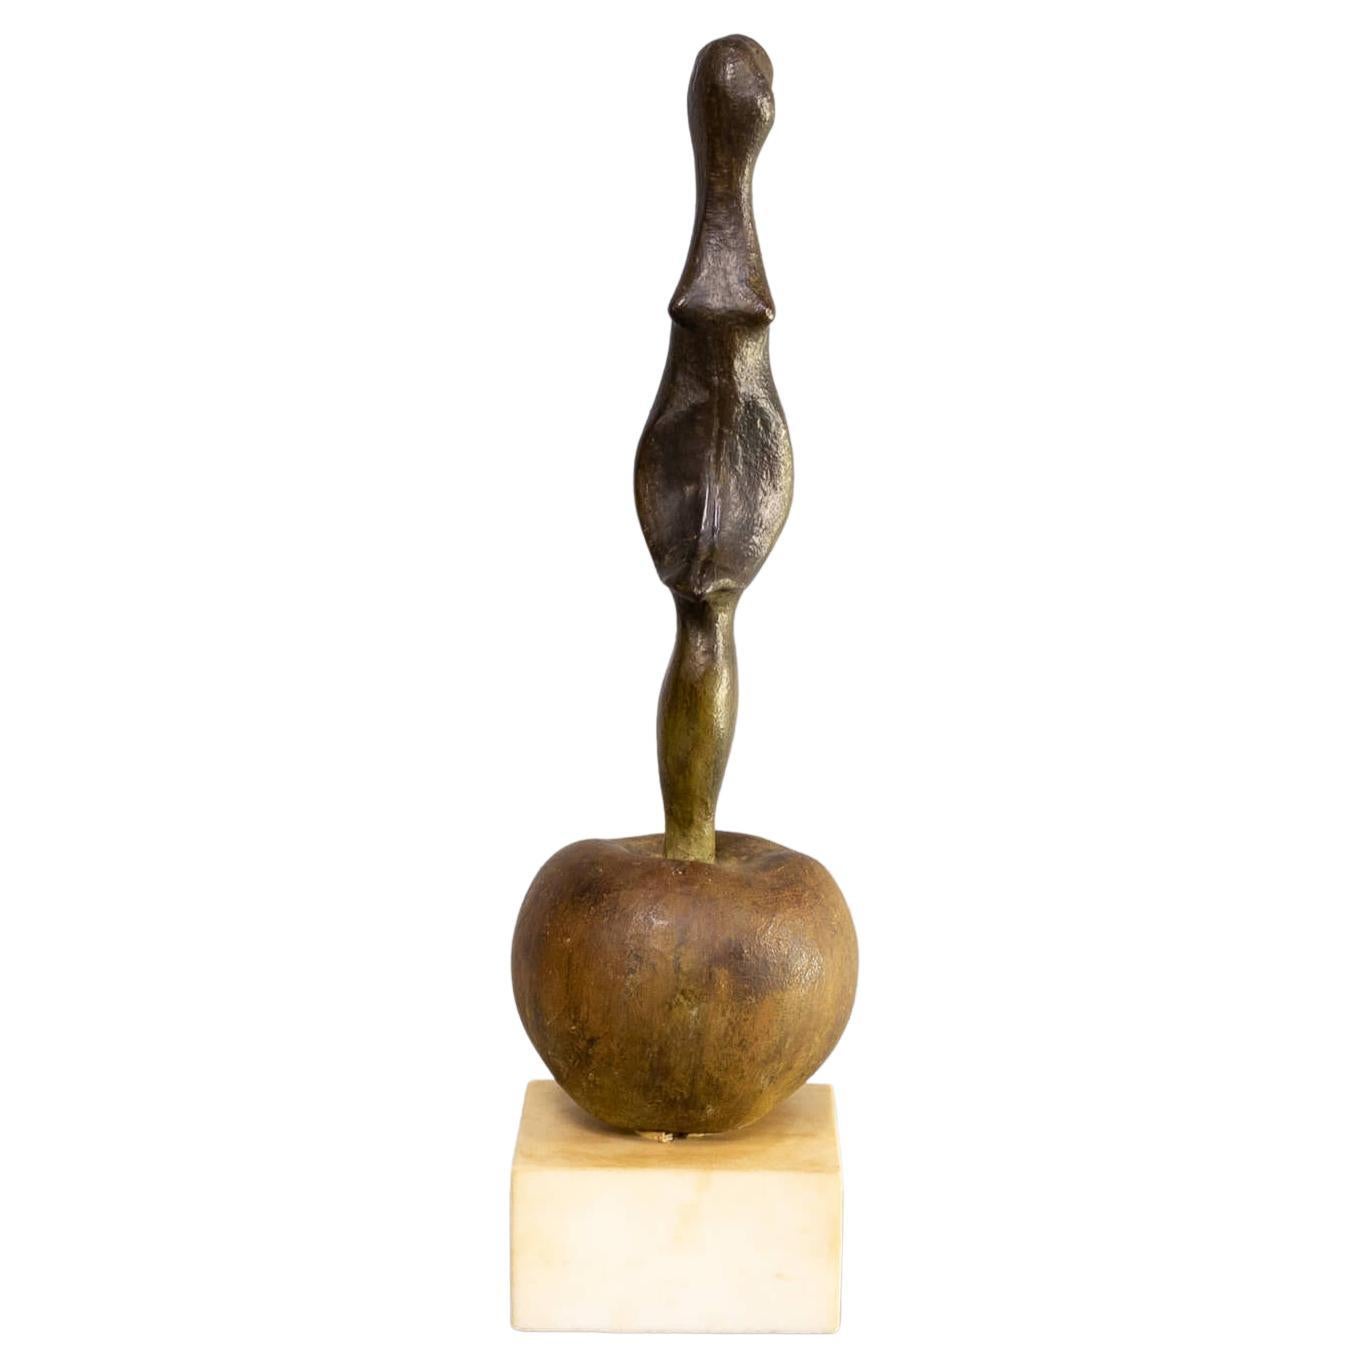 Godfried Pieters Sculpture ‘Abstract Woman on a Ball’ For Sale